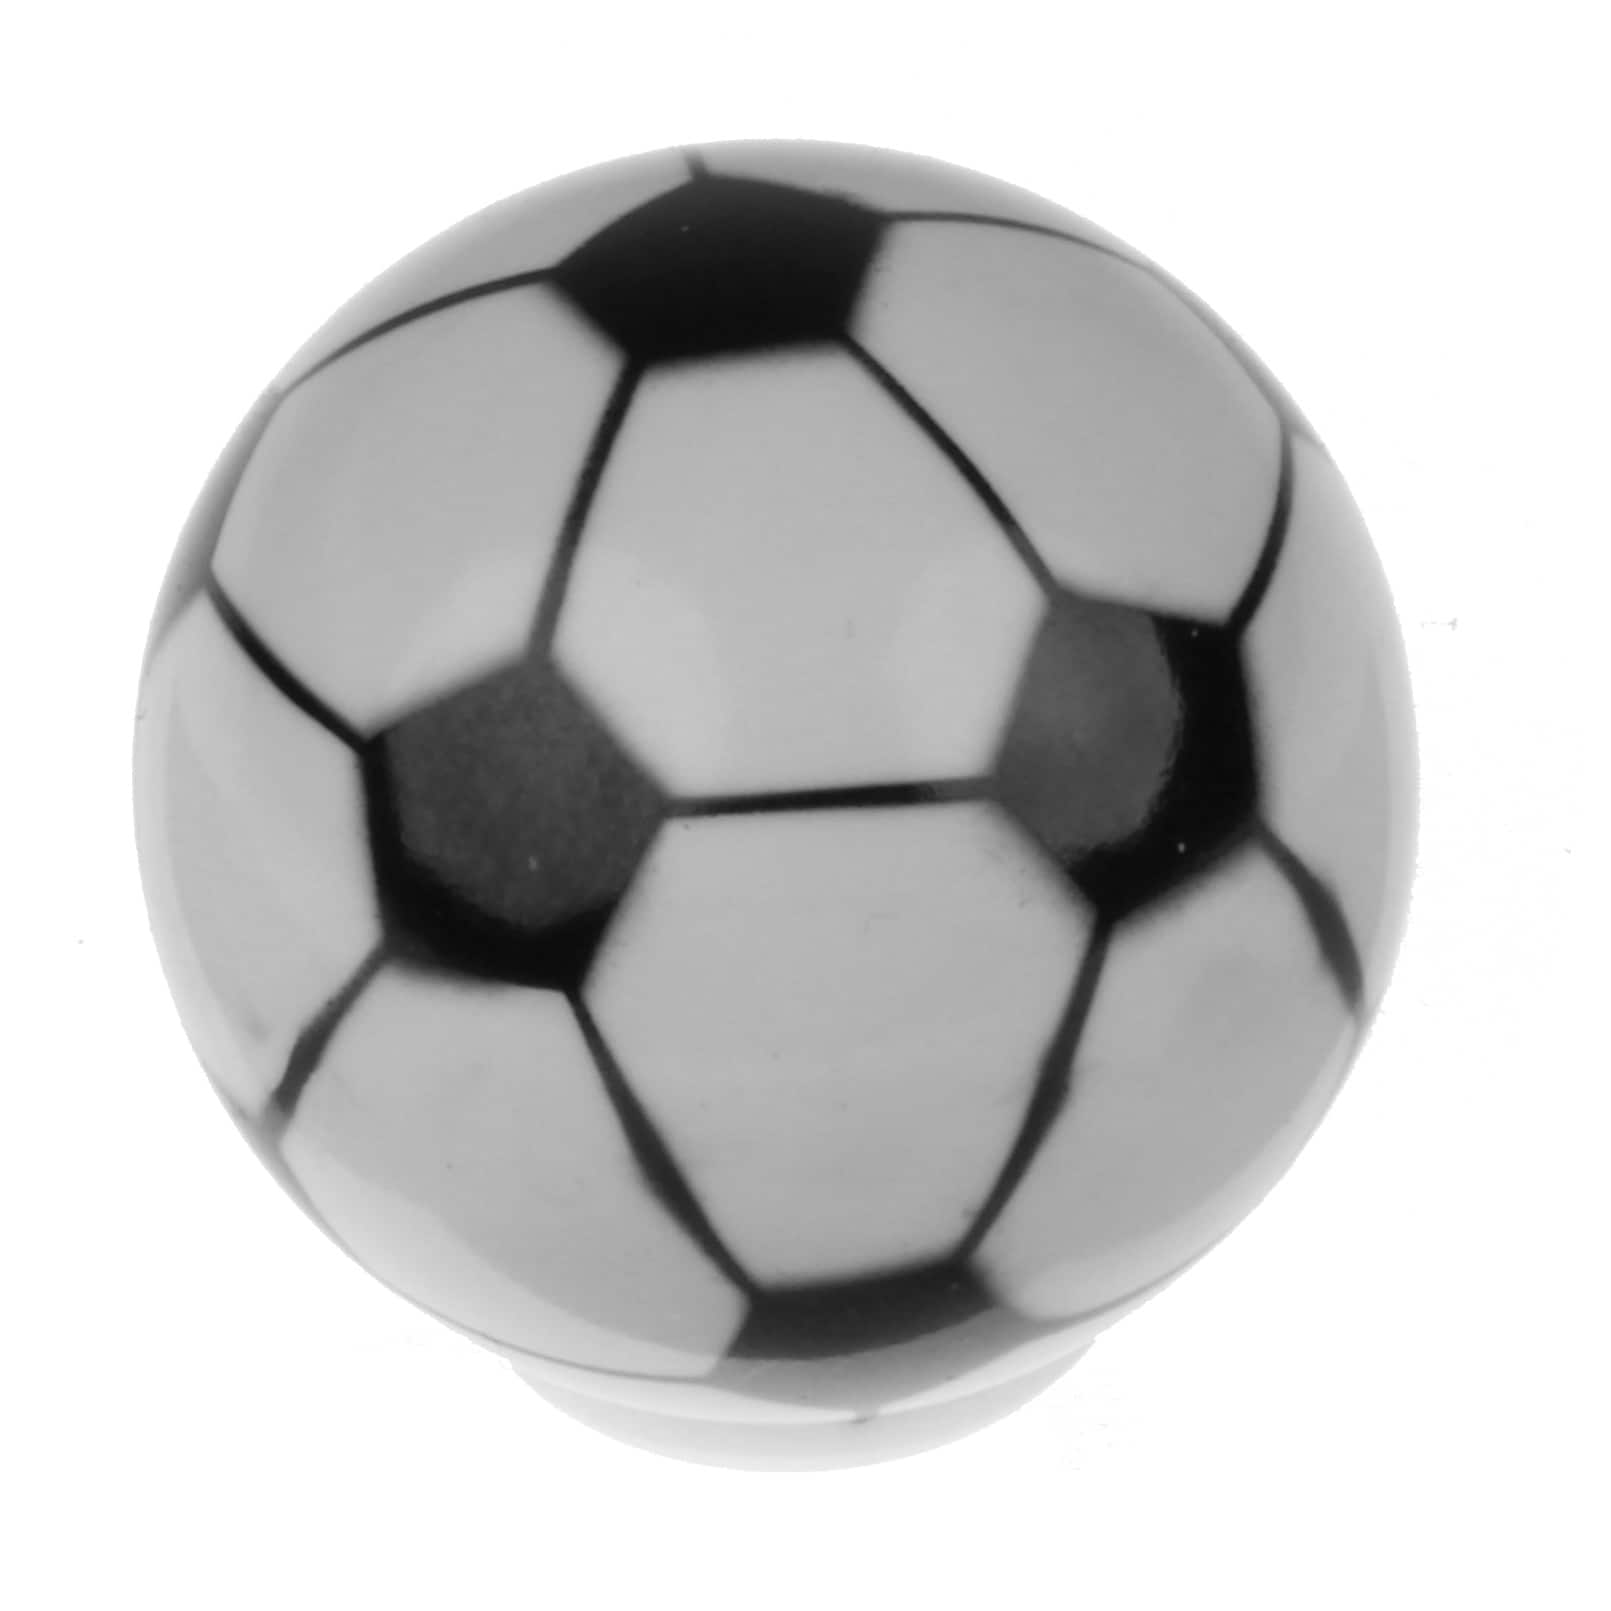 GlideRite 1-1/4 in. Soccer Ball Sports Dresser Drawer Cabinet Knobs, Pack of 10 - image 2 of 3